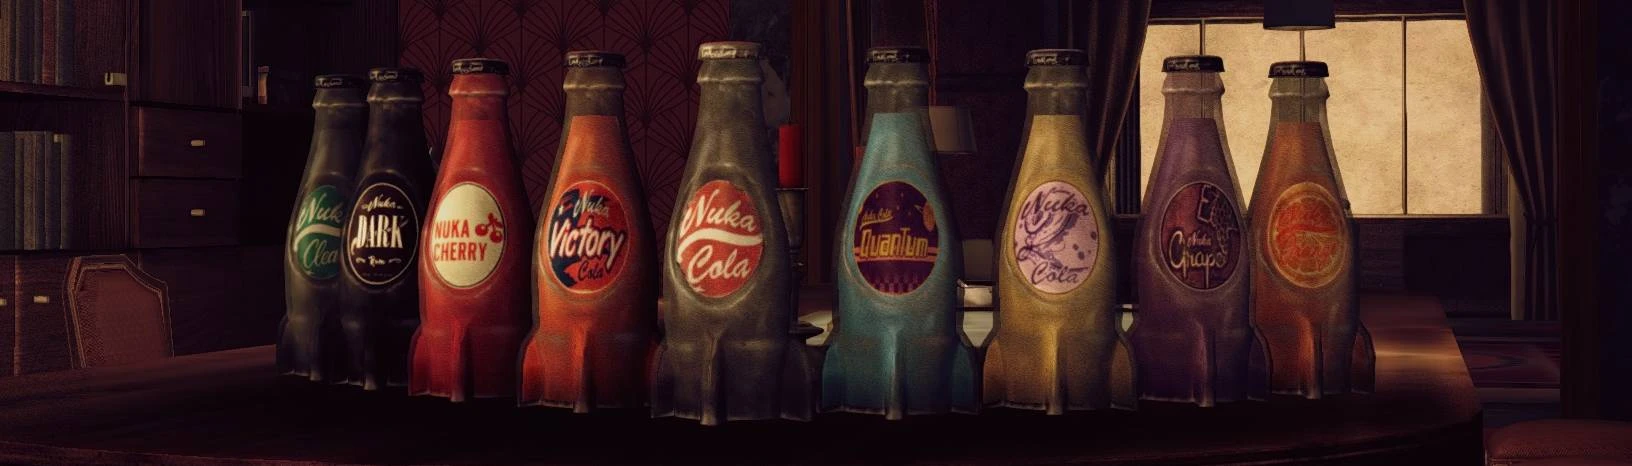 Nuka Cola World - Nuka overhaul by zzjay at Fallout New Vegas